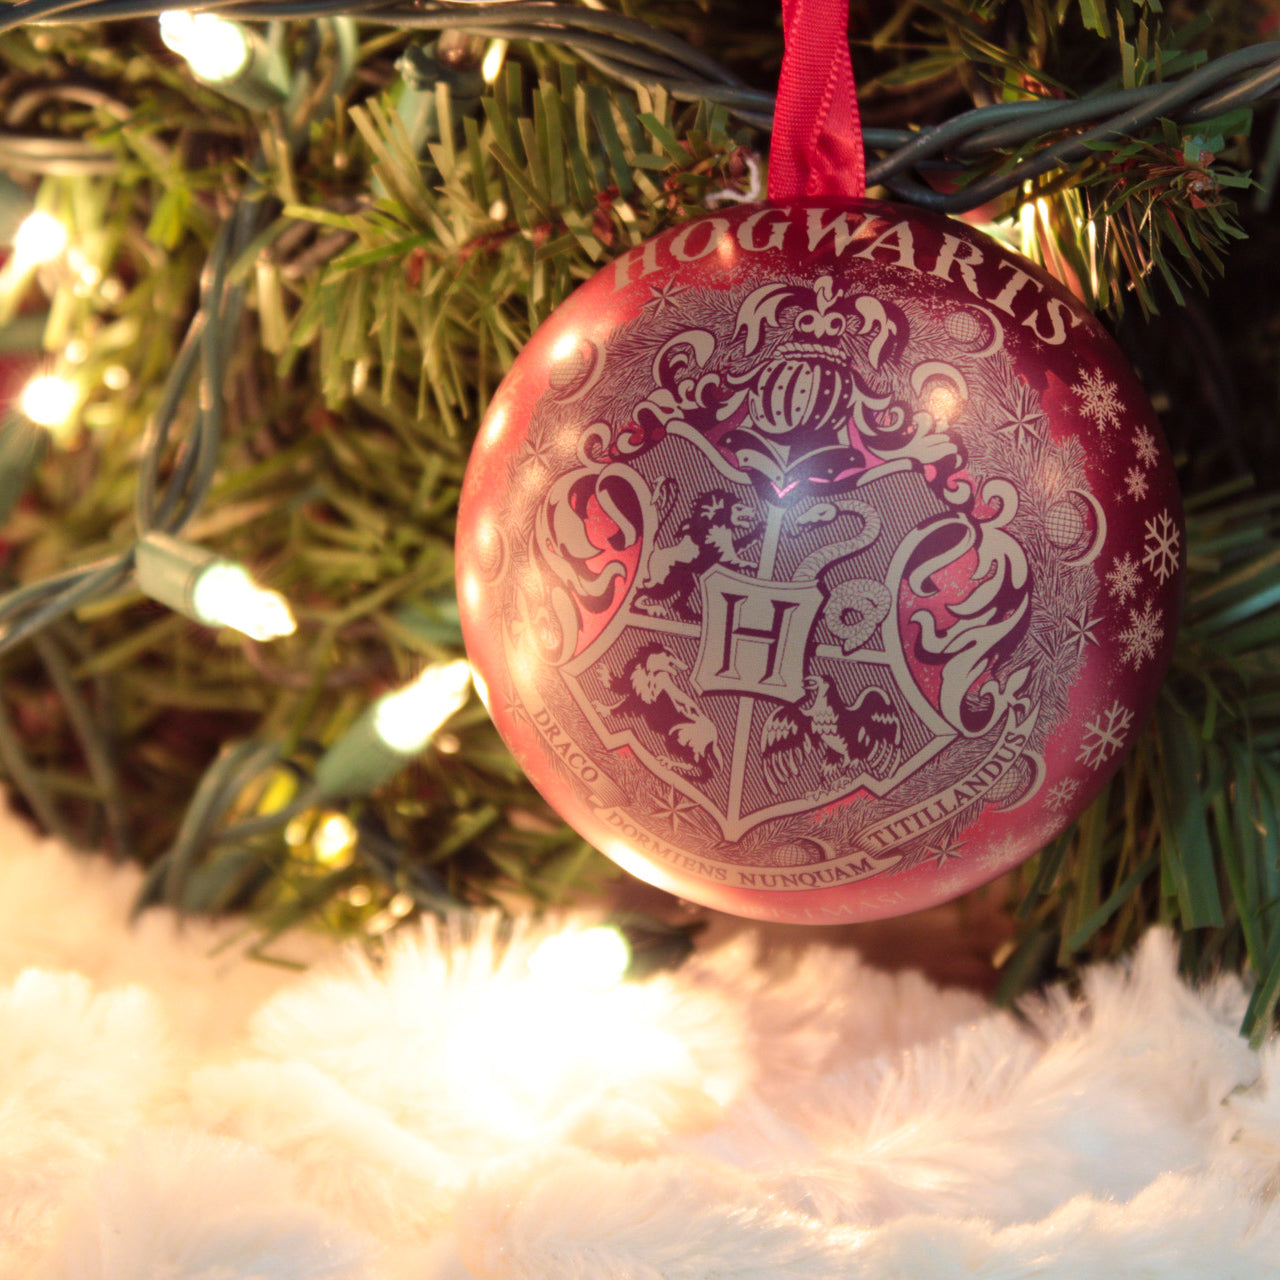 Hogwarts Crest (Harry Potter) Holiday Gift Ornament With Golden Snitch Necklace